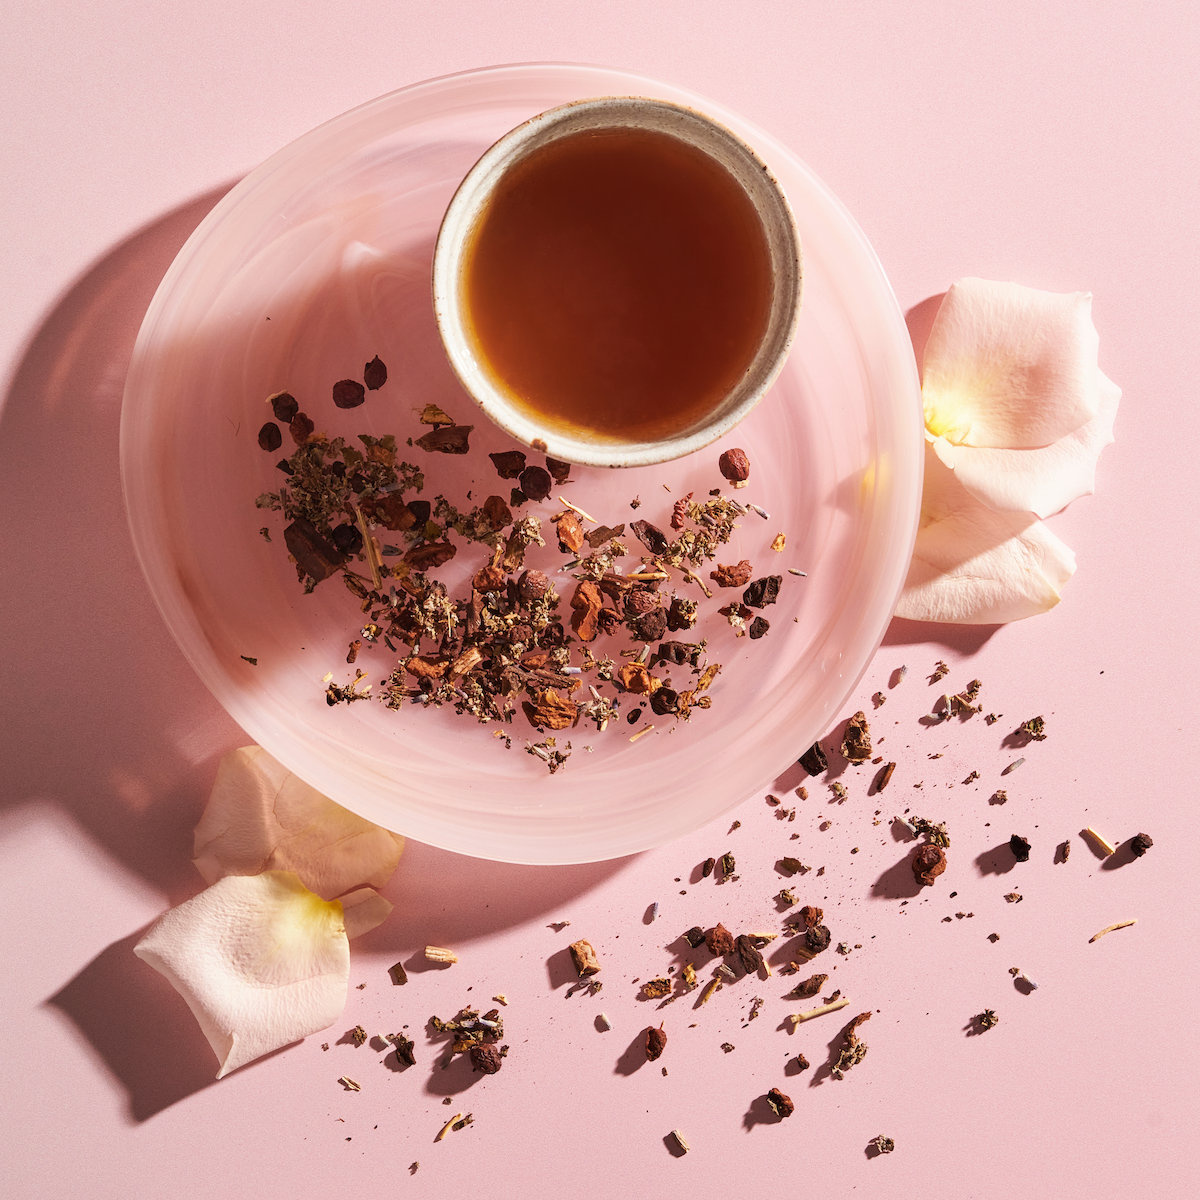 A delicate tea setup featuring a cup filled with Magic Hour&#39;s The Empress: Lavender Currant Shatavari Cocoa Tea of Nurturing Creativity on a pink saucer, surrounded by dried tea leaves and pink rose petals, all placed on a pink background. The arrangement has a soft and calming aesthetic.